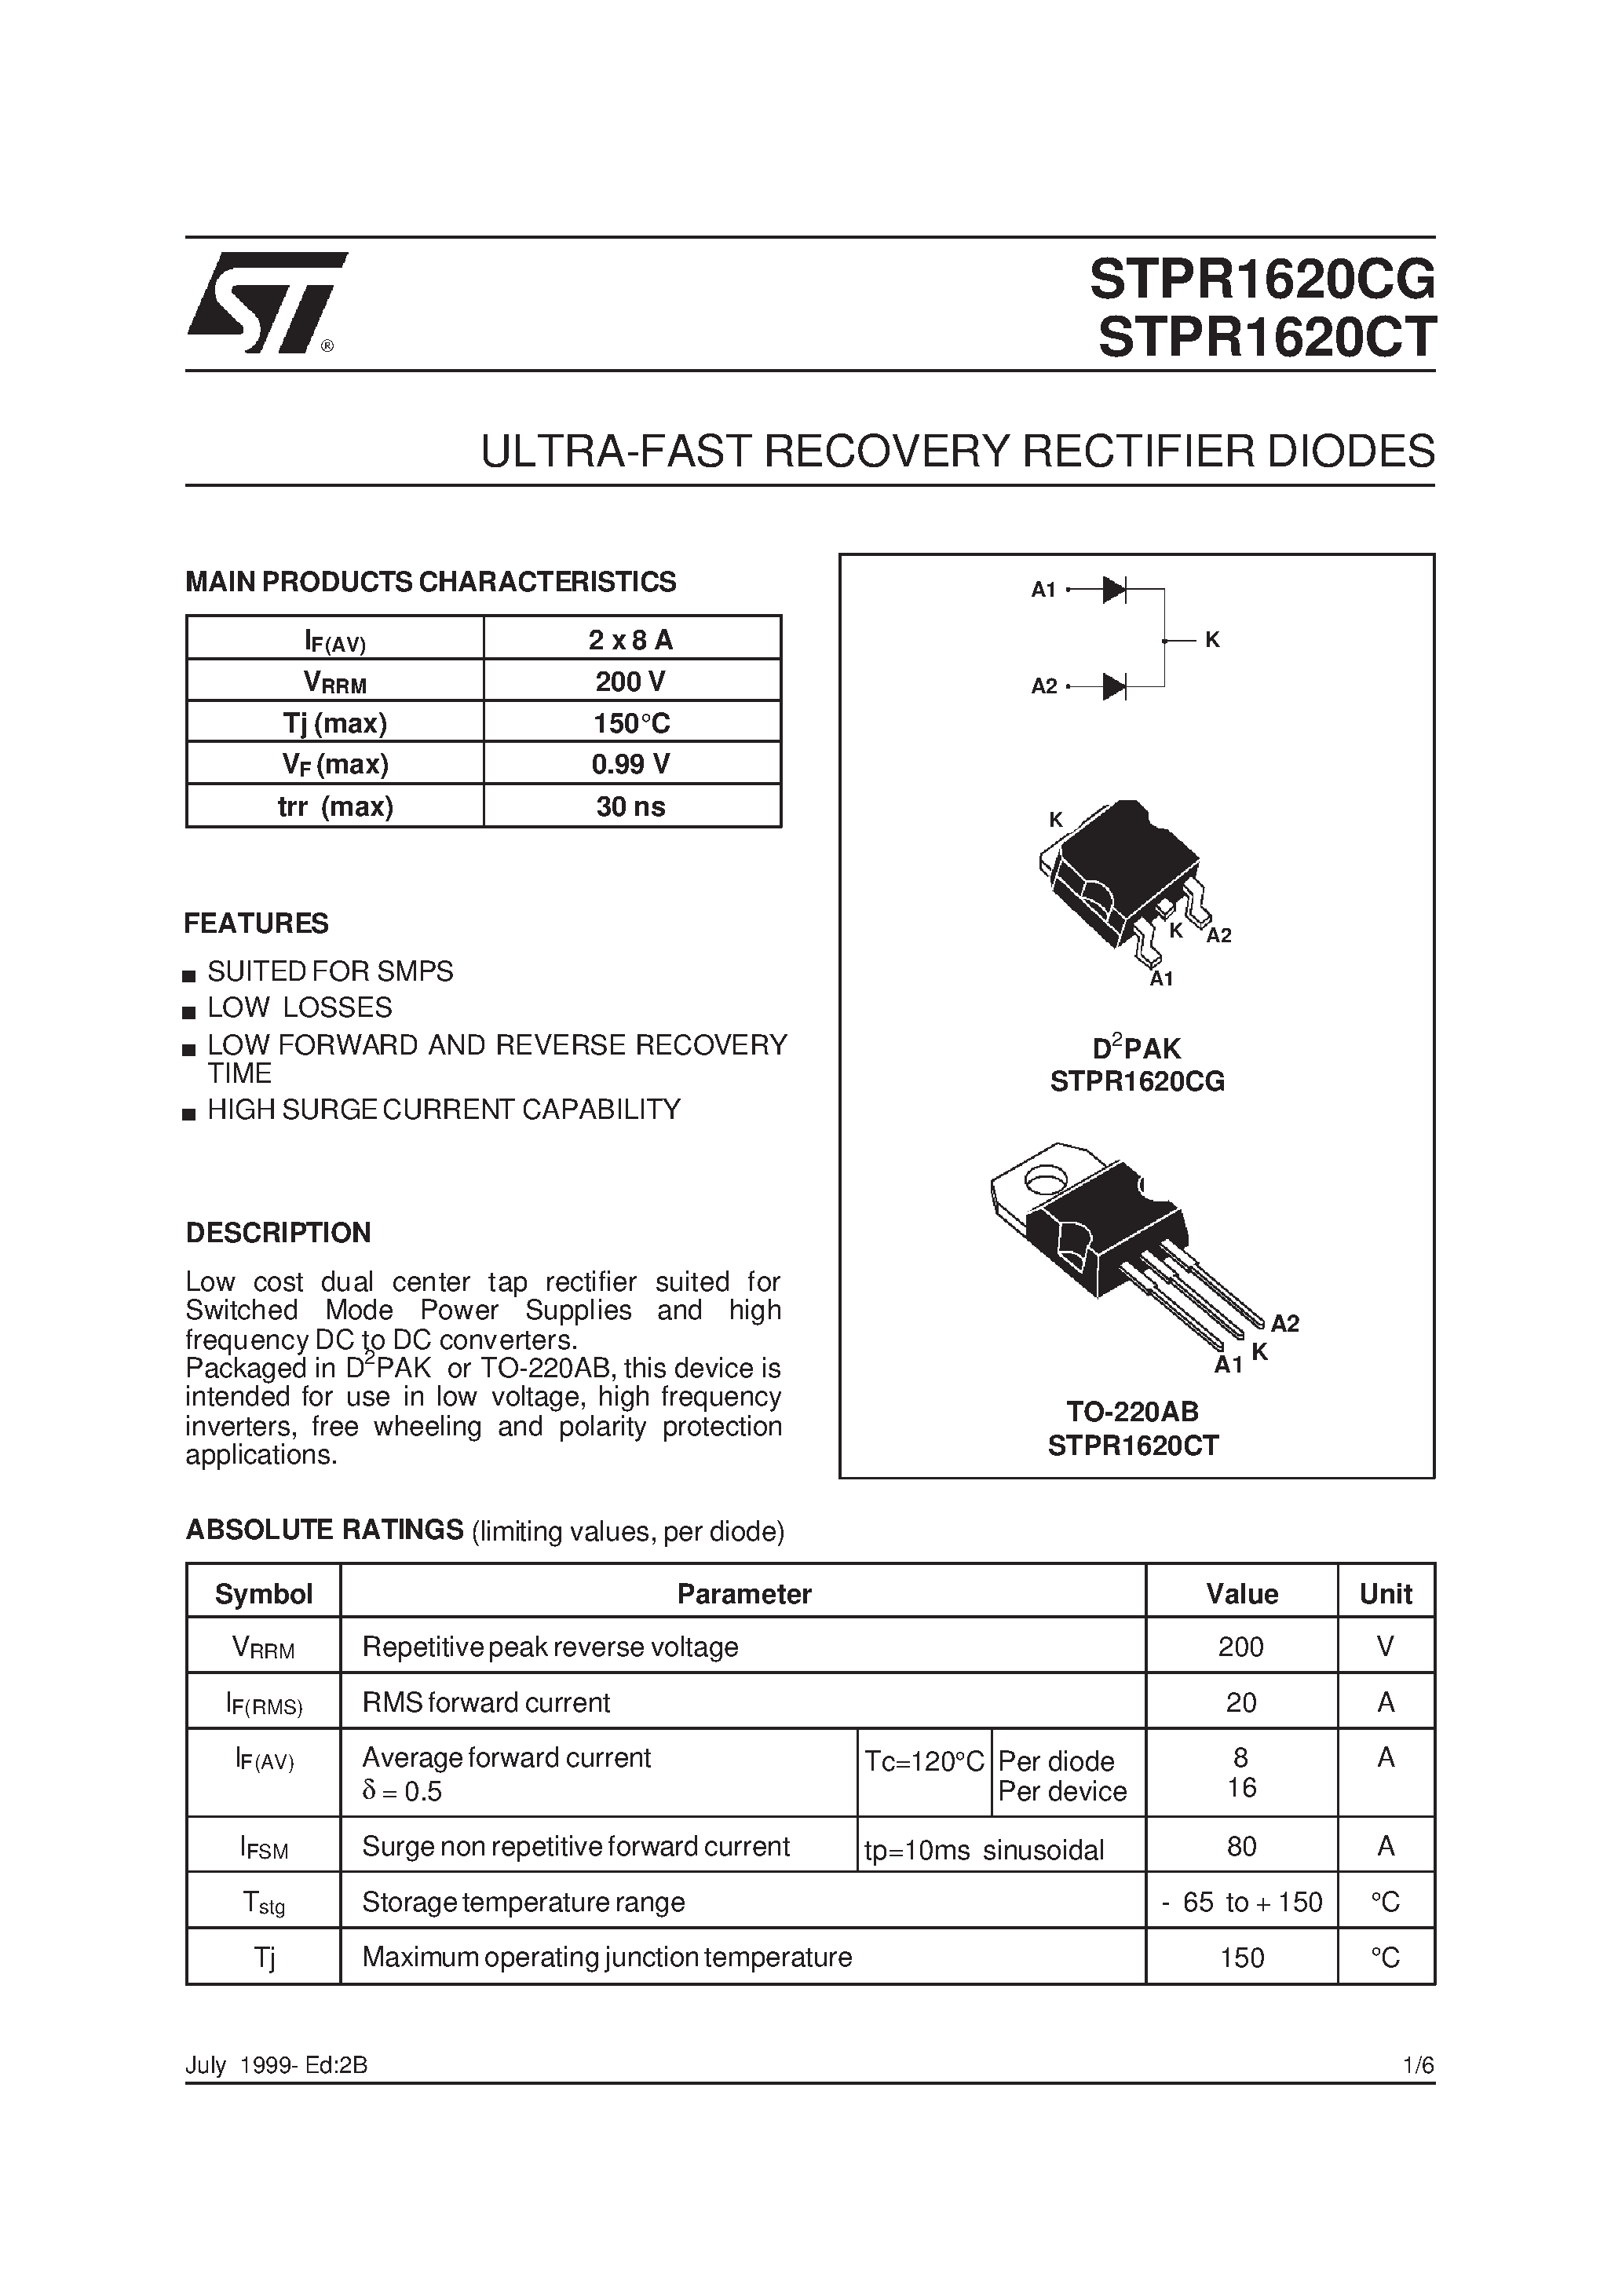 Datasheet STPR1620 - ULTRA-FAST RECOVERY RECTIFIER DIODES page 1